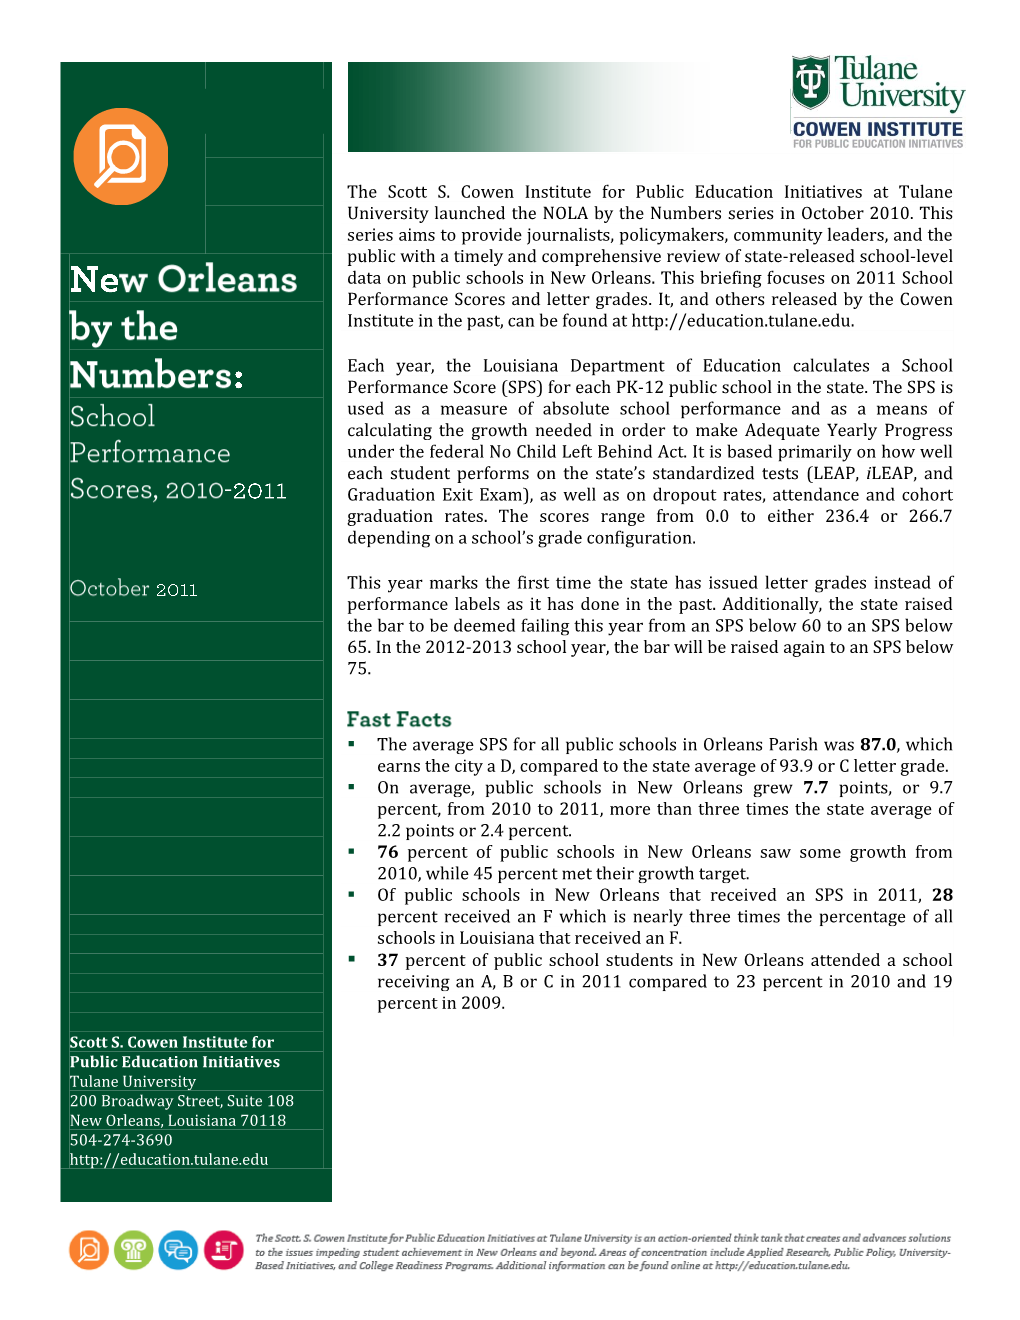 The Scott S. Cowen Institute for Public Education Initiatives at Tulane University Launched the NOLA by the Numbers Series in October 2010